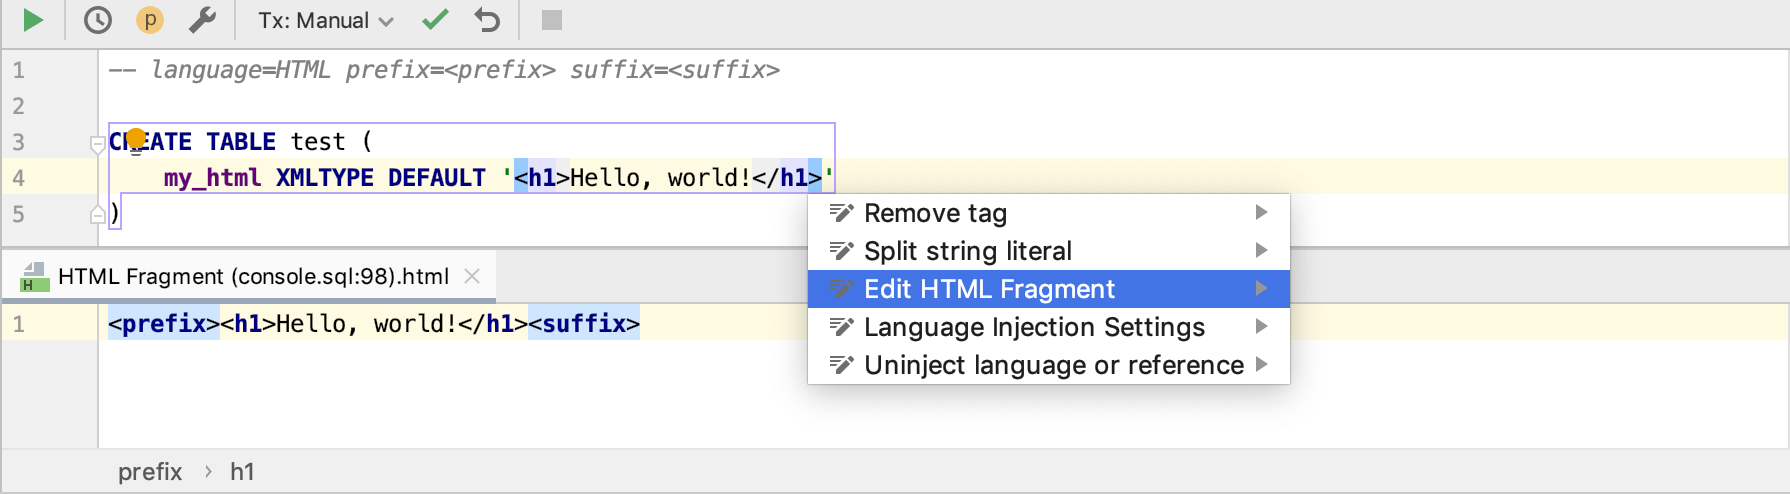 Using prefixes and suffixes in language injection